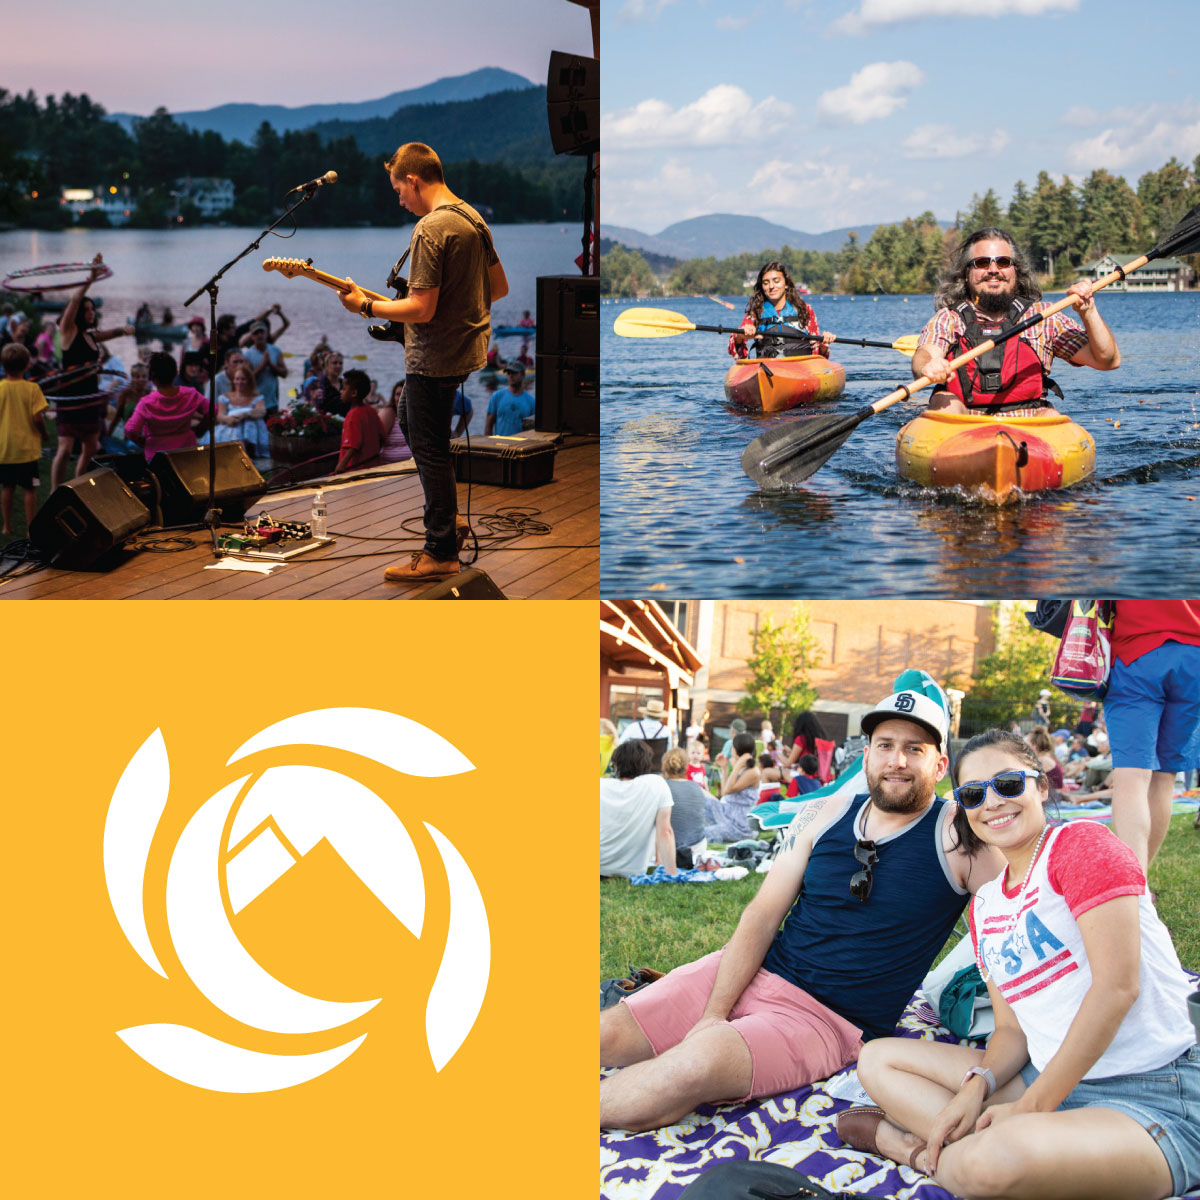 Image Grid: Musician performs at Mid's Park&#44; couple relaxes on a picnic blanket&#44; couple paddles on Mirror Lake